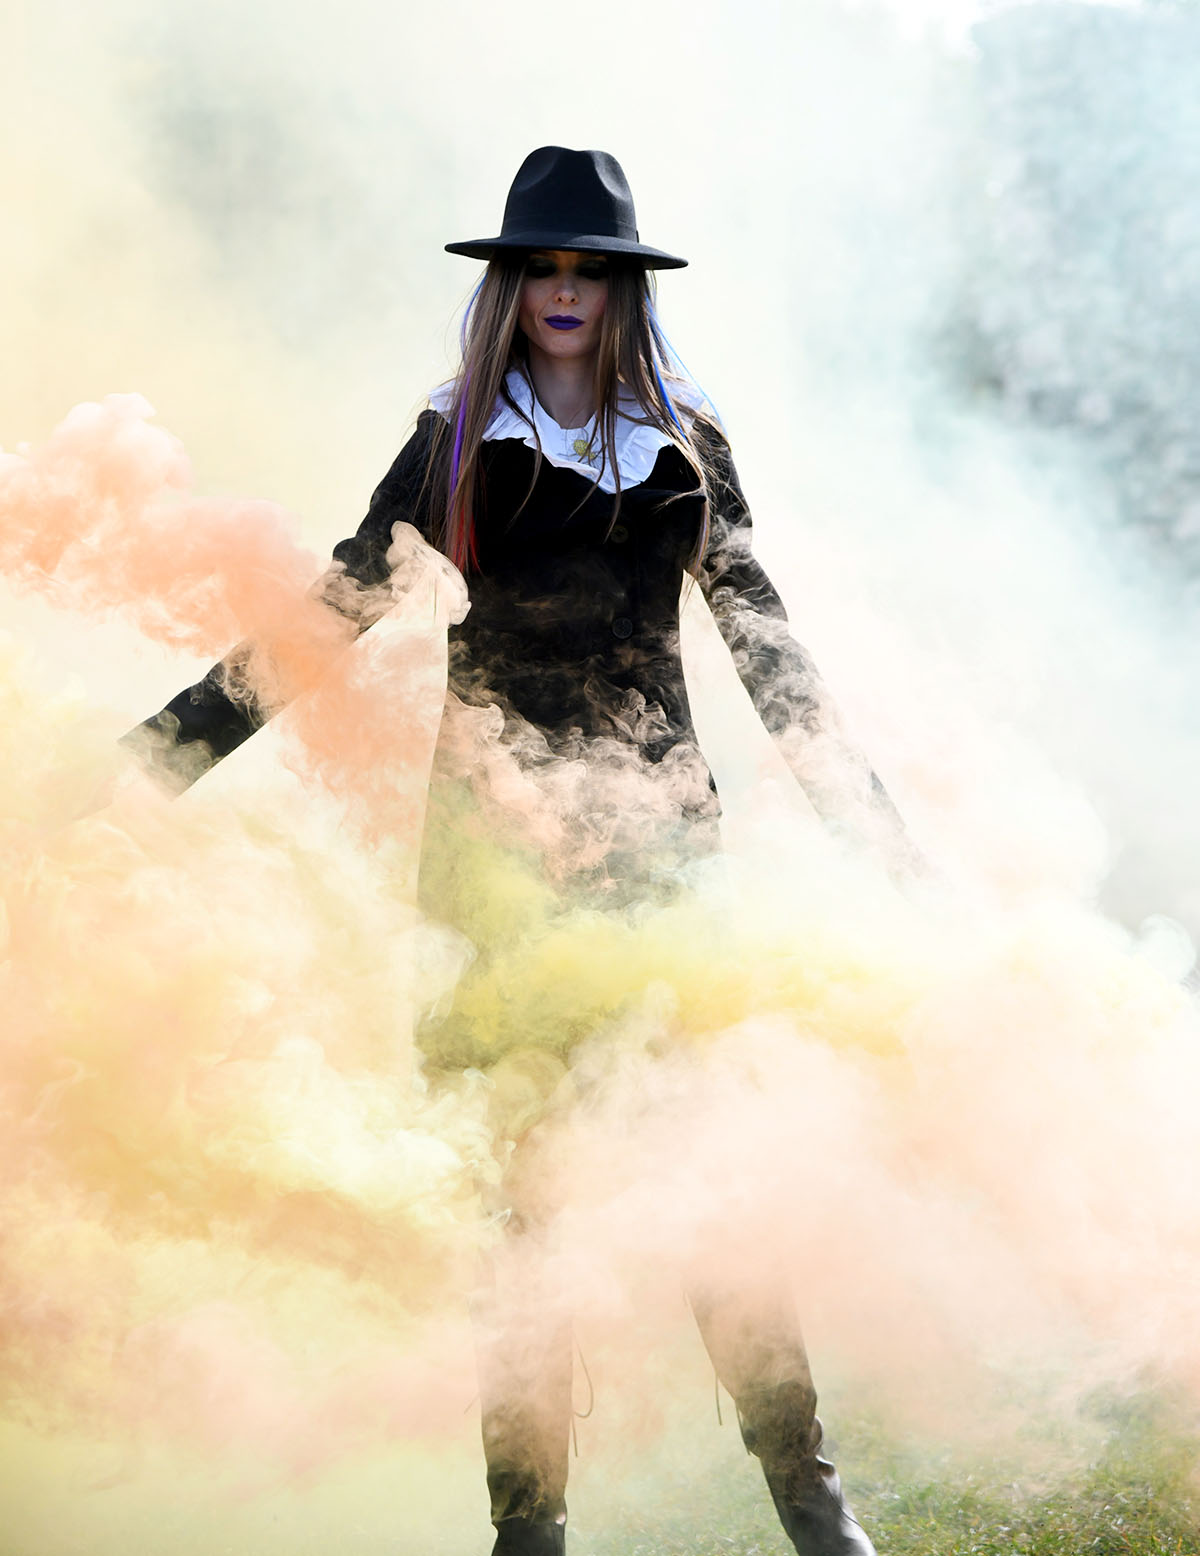 Extravagant editorial: FALLing for Halloween